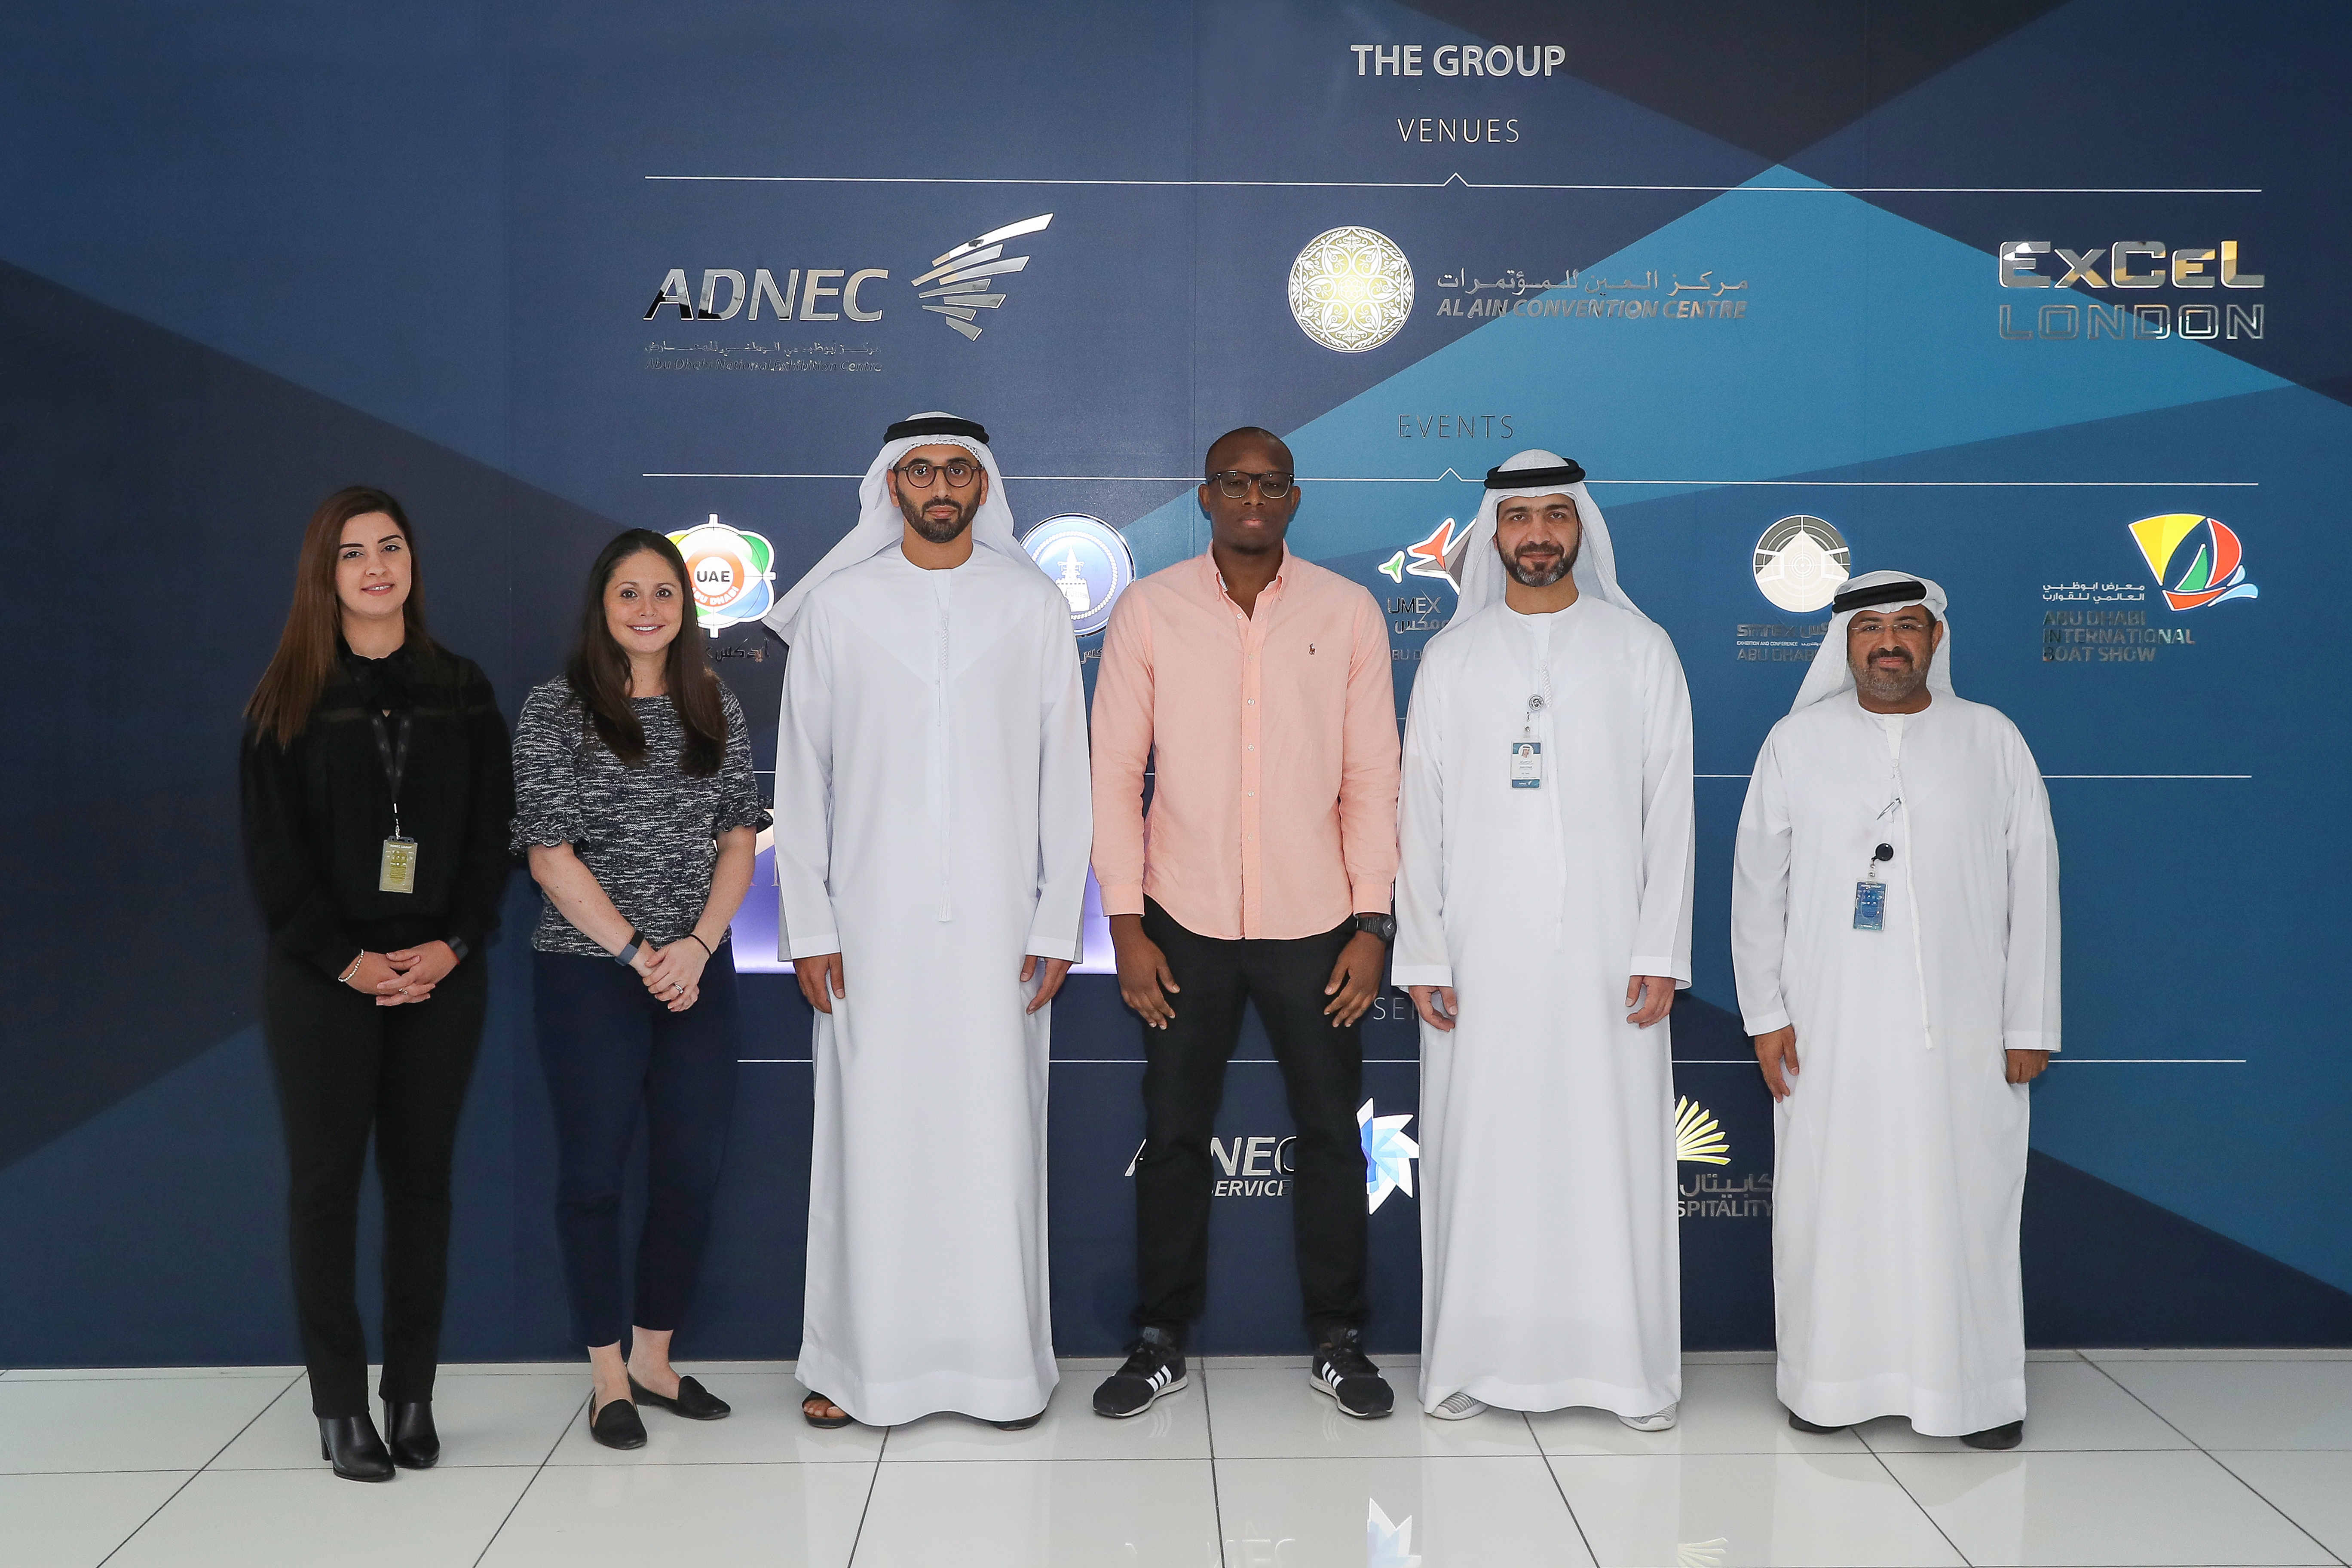 ADNEC Further Demonstrates Commitment To Innovation